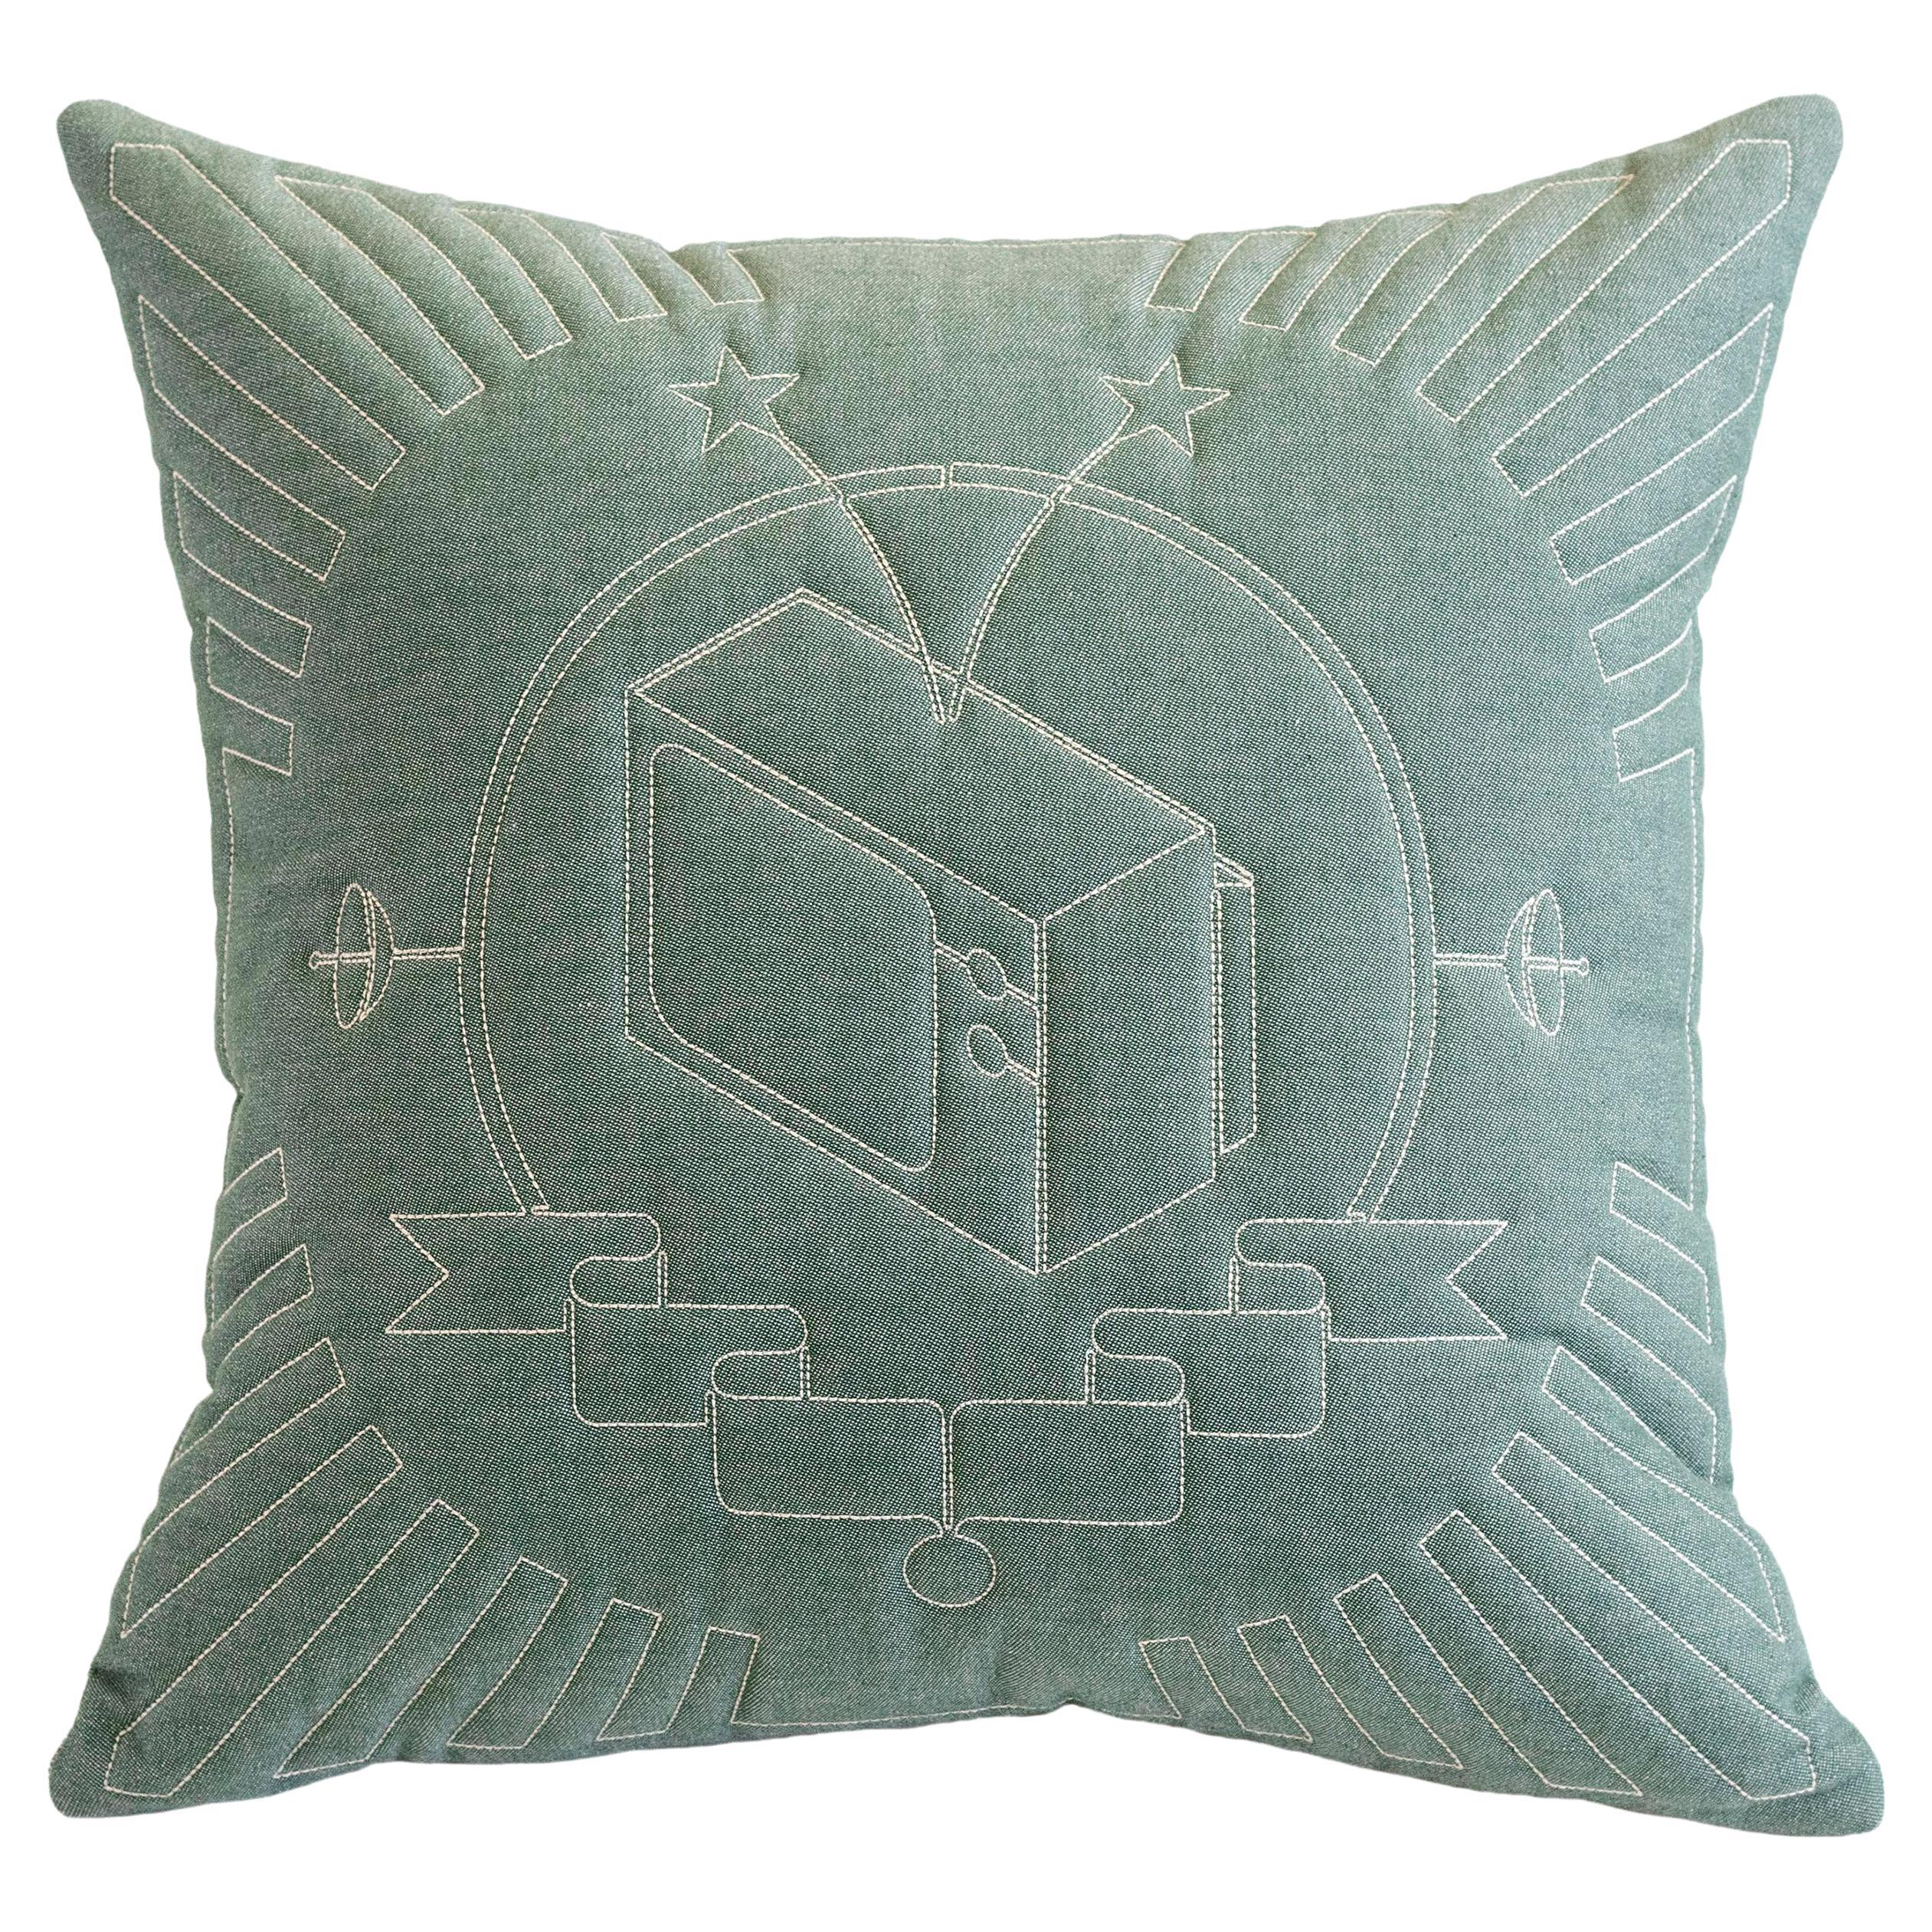 Green Cotton Matelasse Television Pillow by Paulo Kobylka